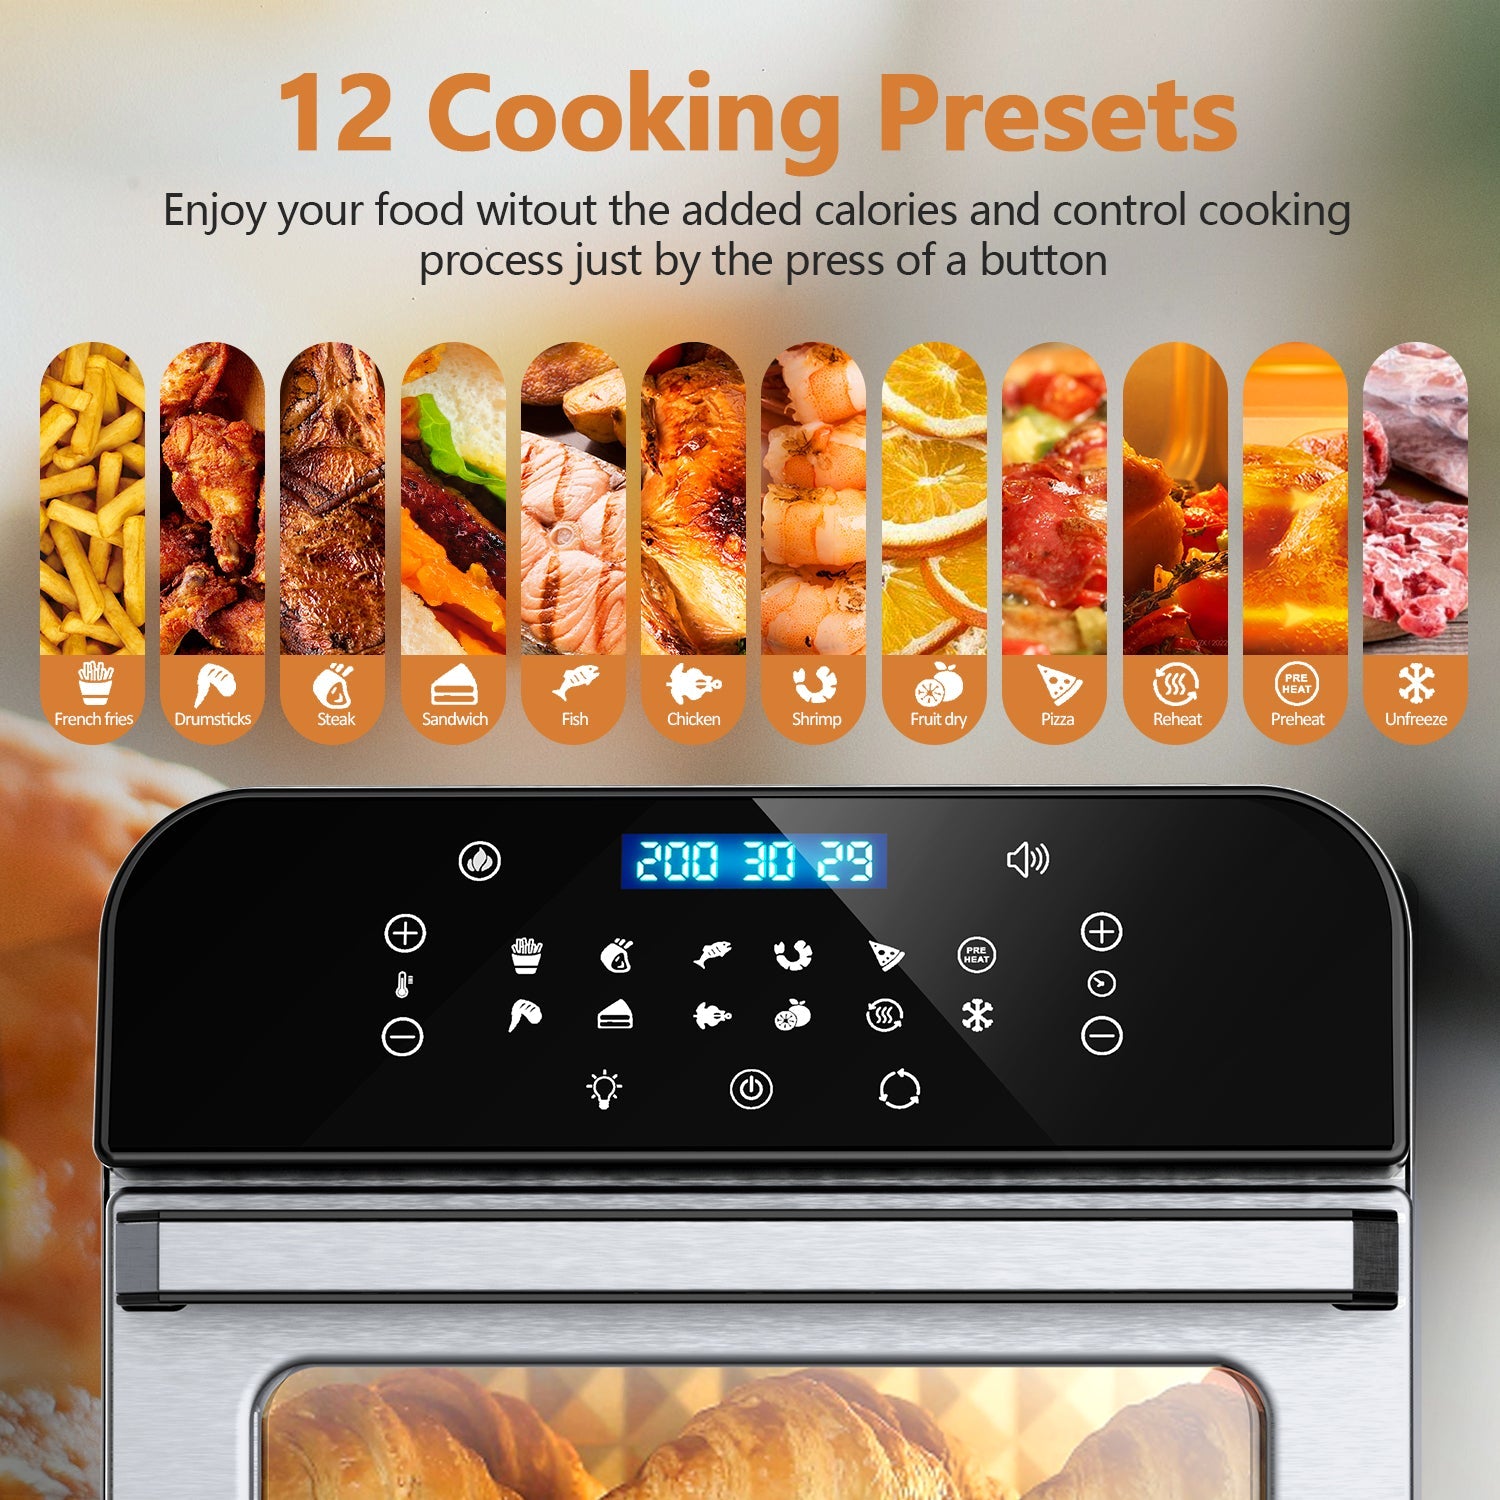 WHALL Air Fryer, 5.5QT Air Fryer Oven with LED Digital Touchscreen, 12-in-1 Cooking Functions Air fryers, Dishwasher-Safe Basket, Stainless Steel/BS